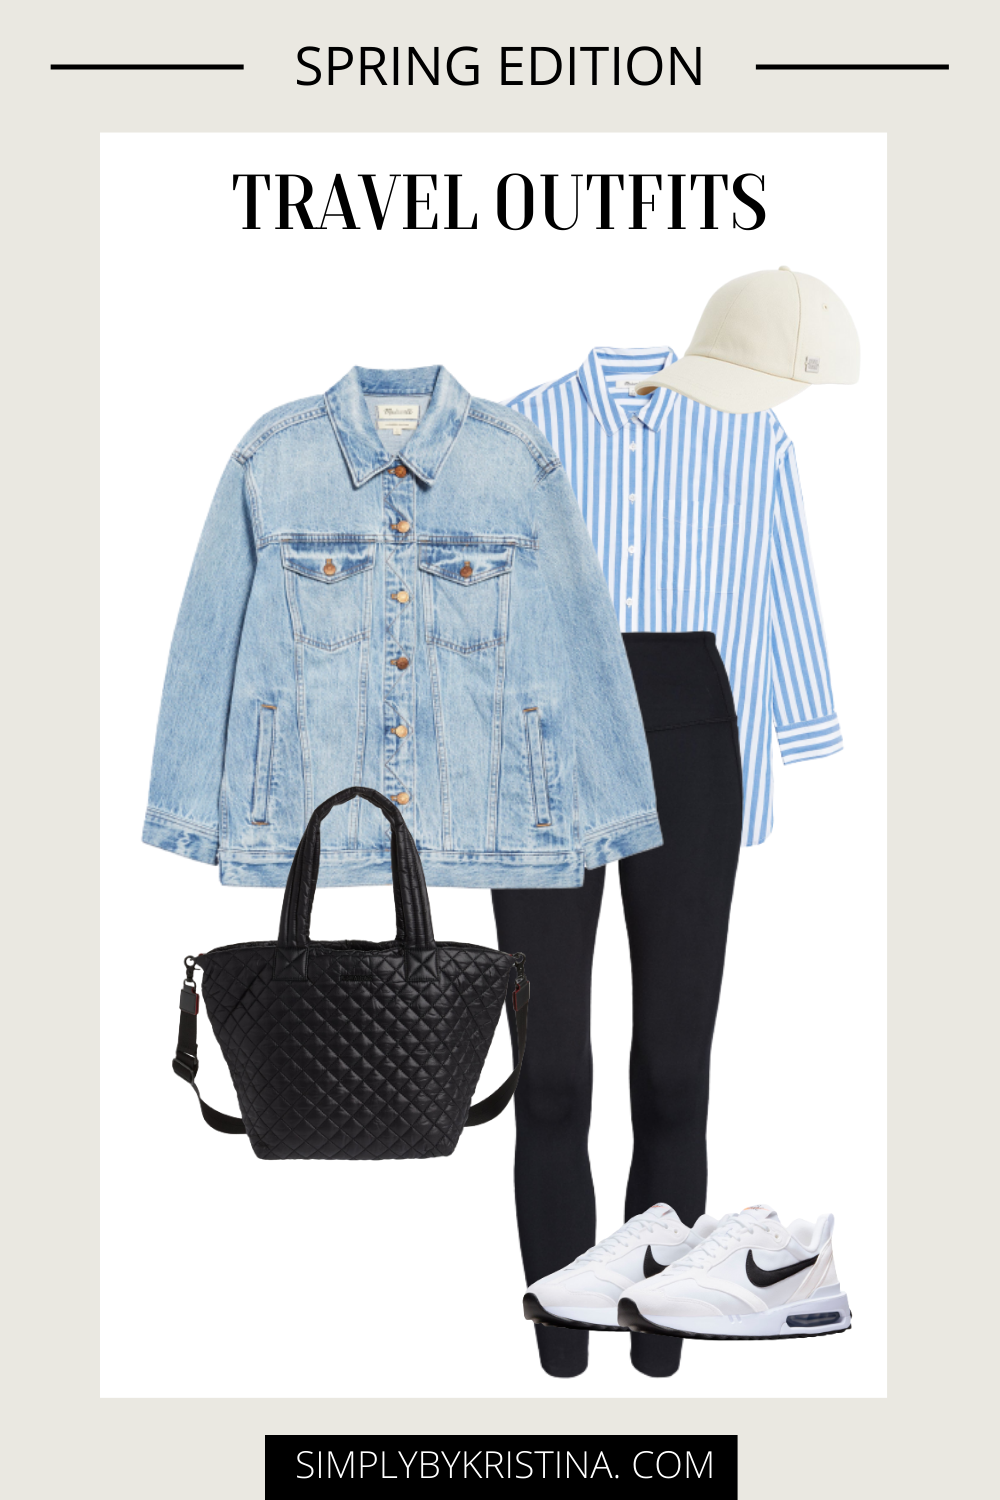 21 Effortlessly Stylish Airport Travel Outfits For Spring